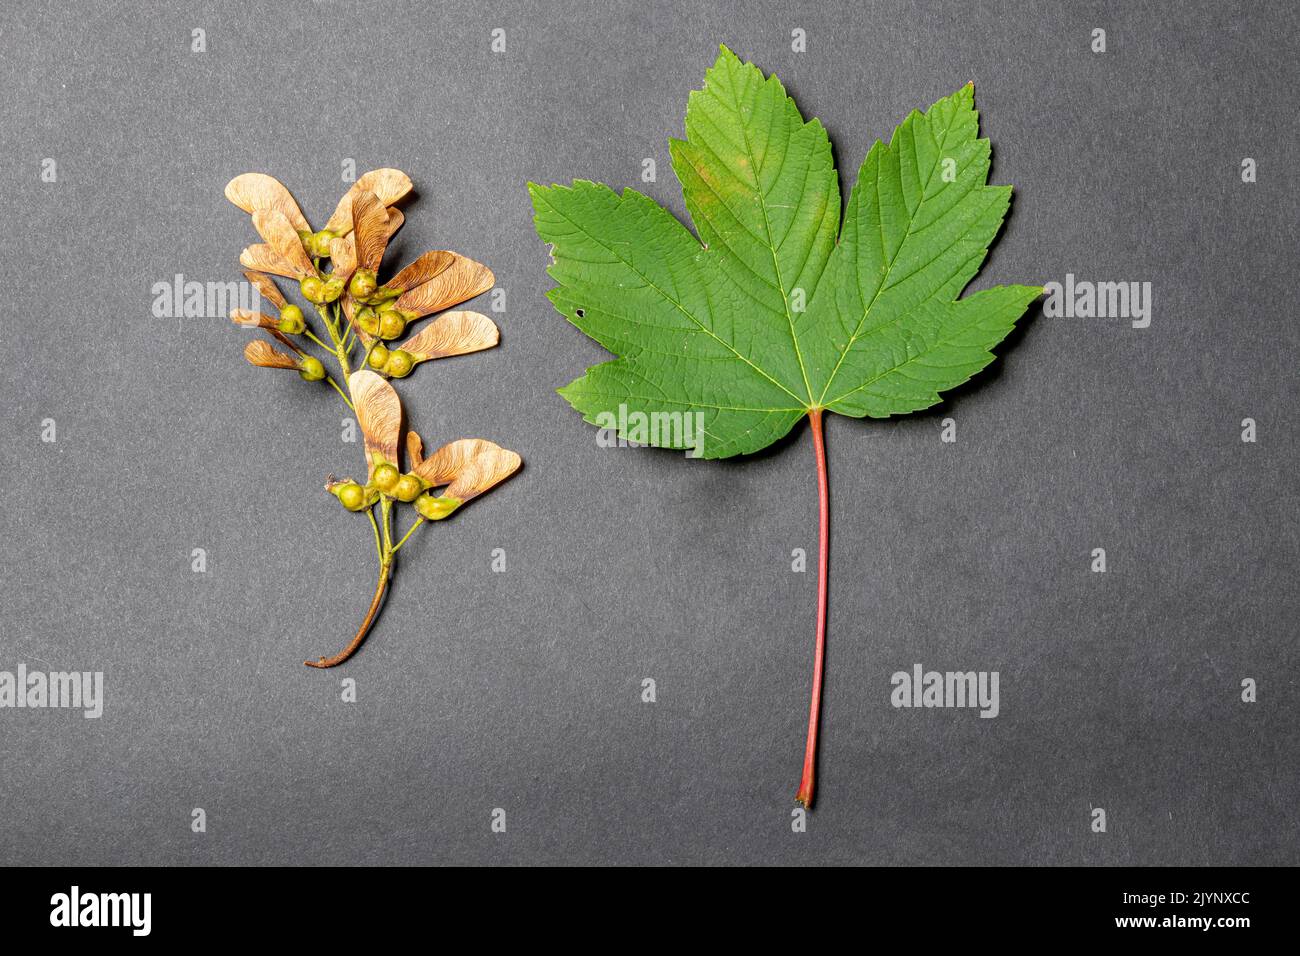 Sycamore maple (Acer pseudoplatanus) leaf and samaras in grey background, France Stock Photo